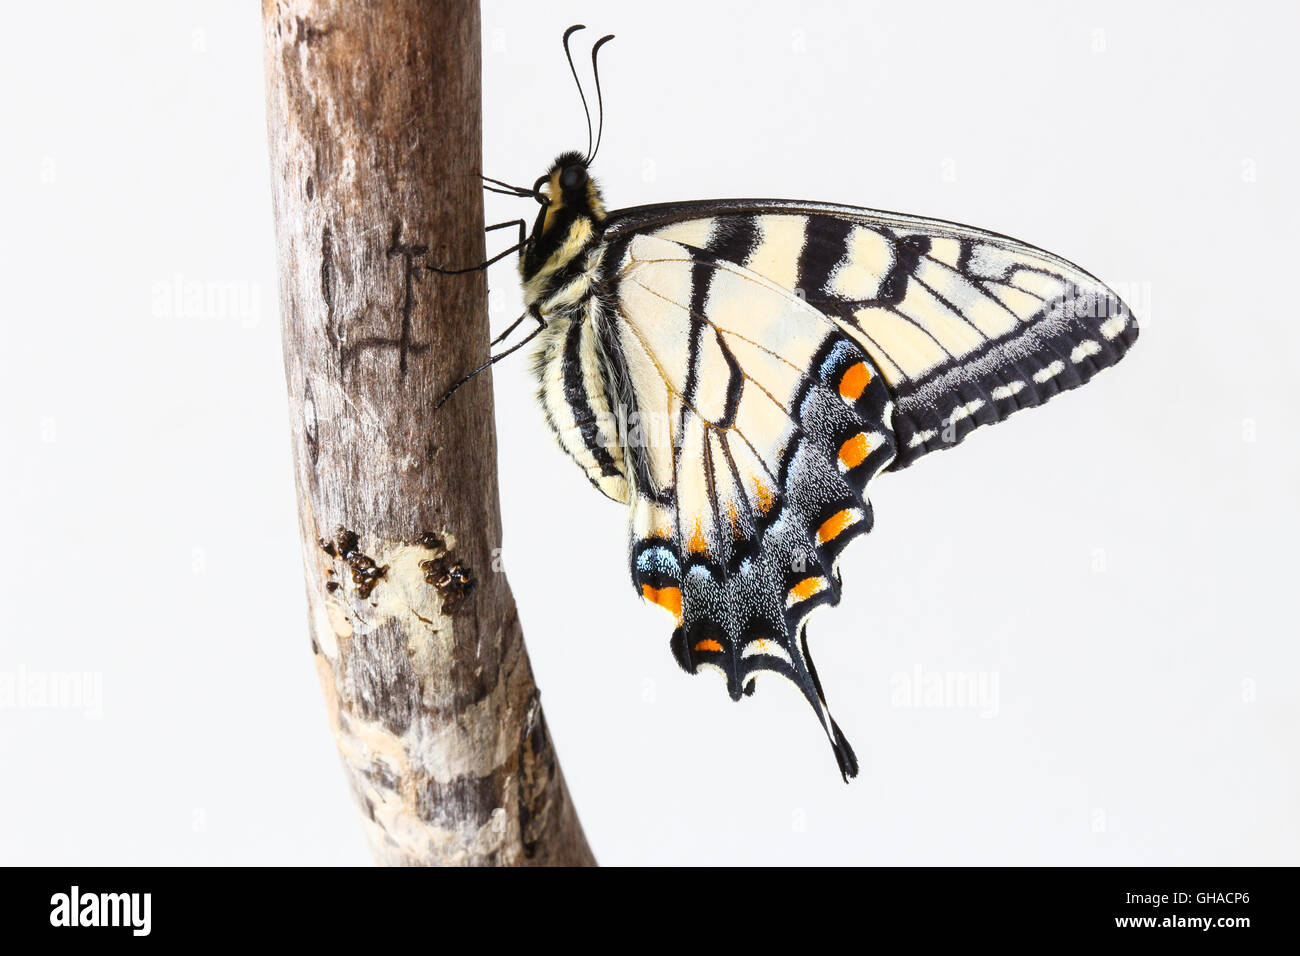 A freshly emerged male Eastern Tiger Swallowtail butterfly (Papilio glaucus) resting on a piece of driftwood, Indiana, USA Stock Photo